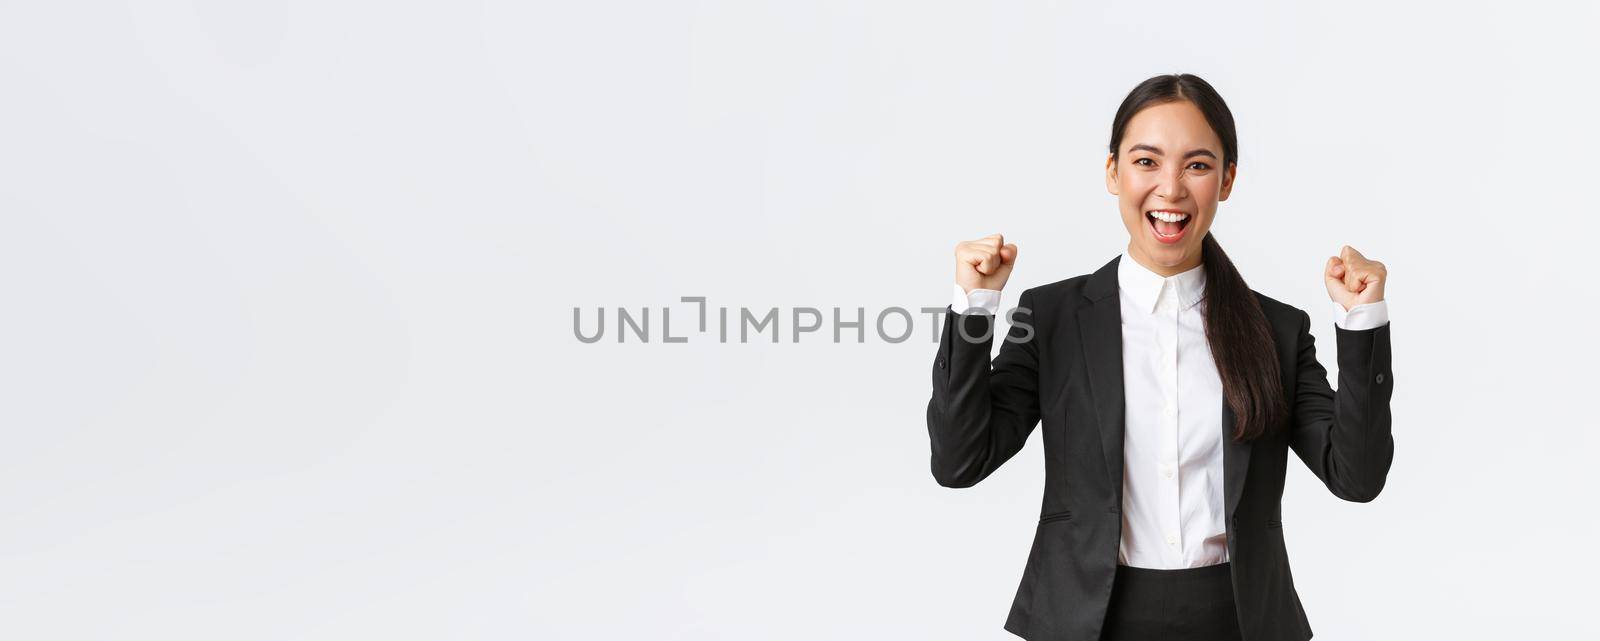 Successful winning female entrepreneur in black suit, fist pump and shouting yes excited, celebrating victory. Businesswoman triumphing over big achievement over white background.